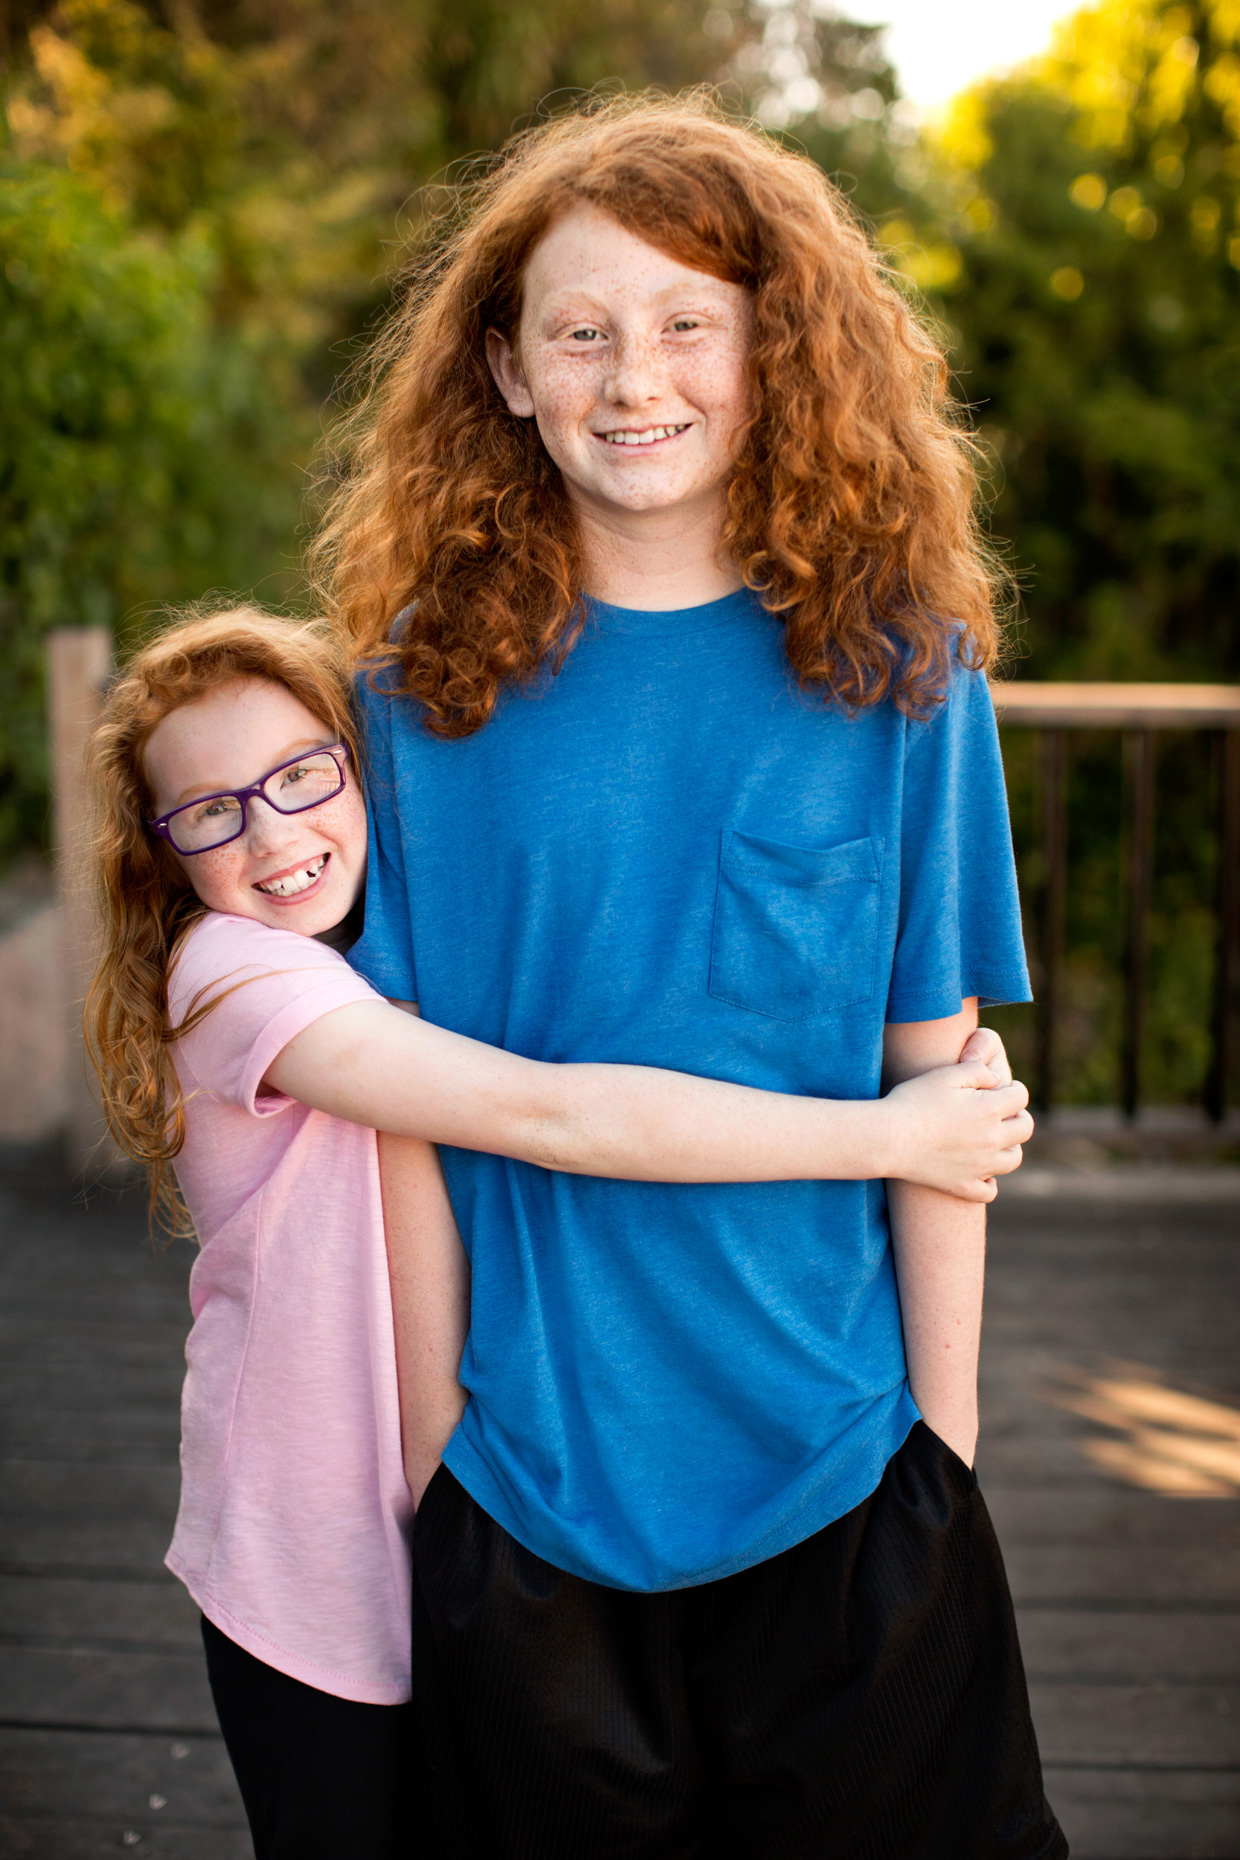 A red haired girl in a pink t-shirt hugs her older brother